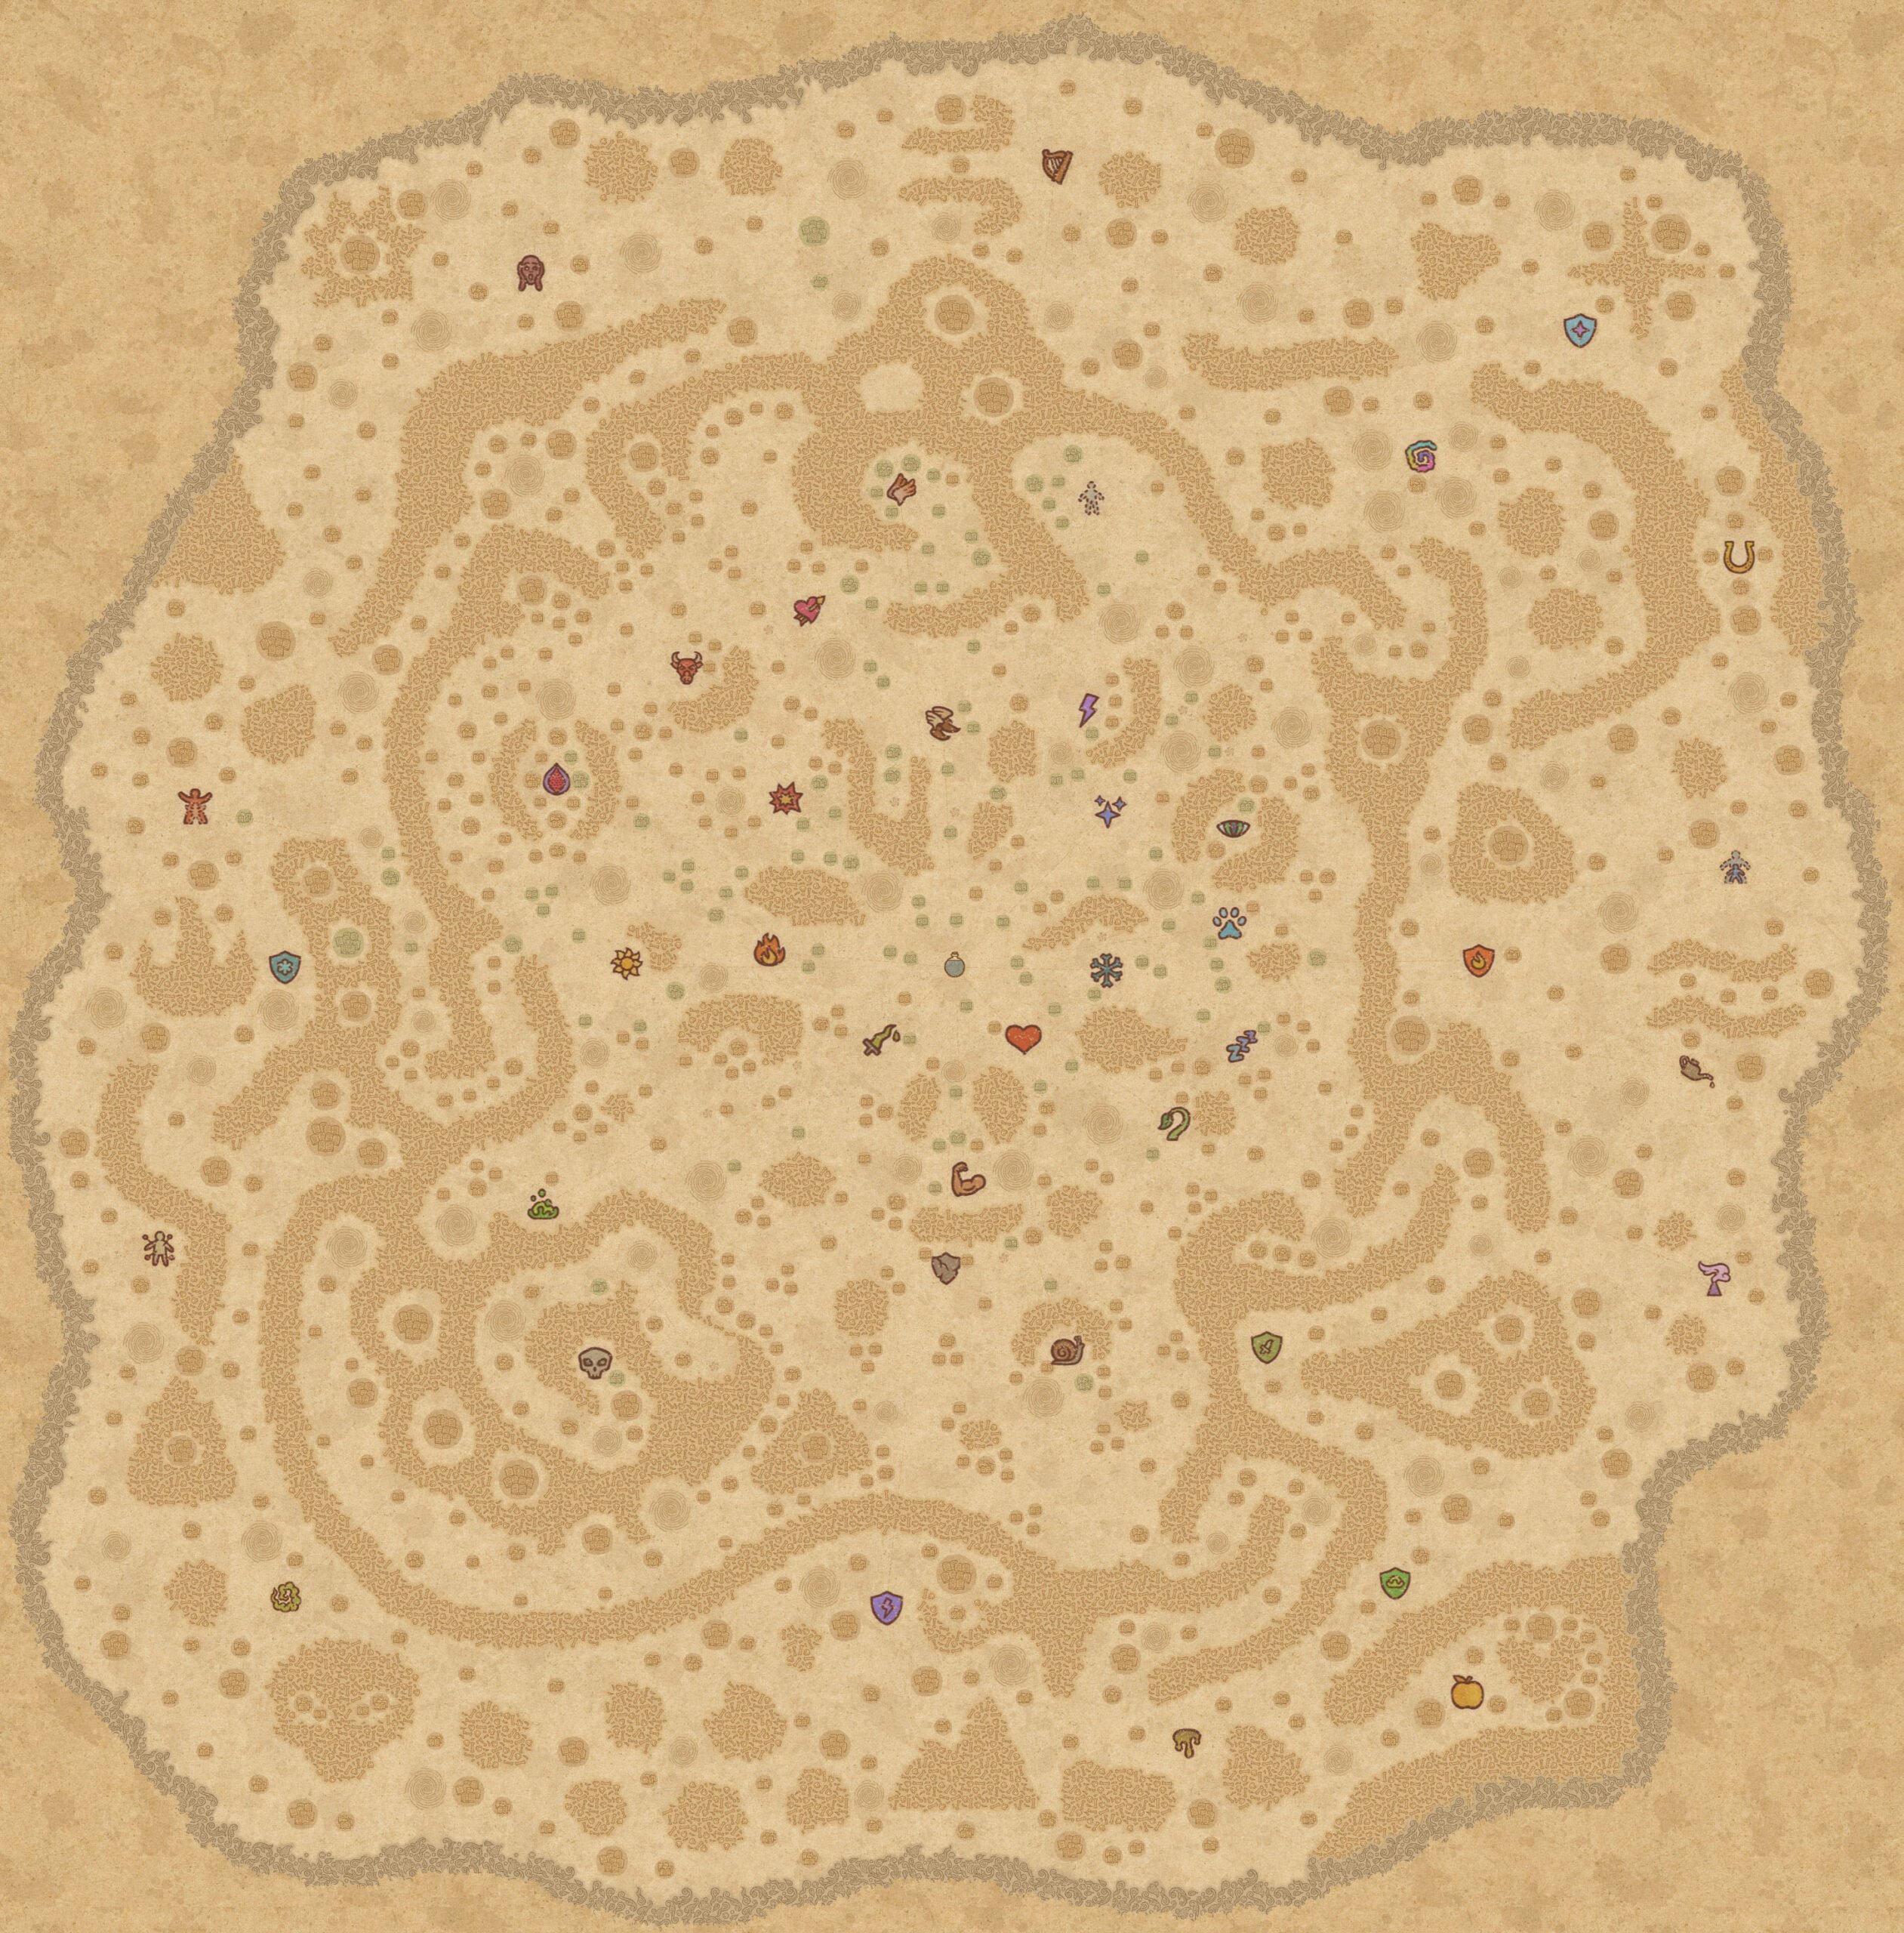 photo of the full water map for our potion craft maps guide